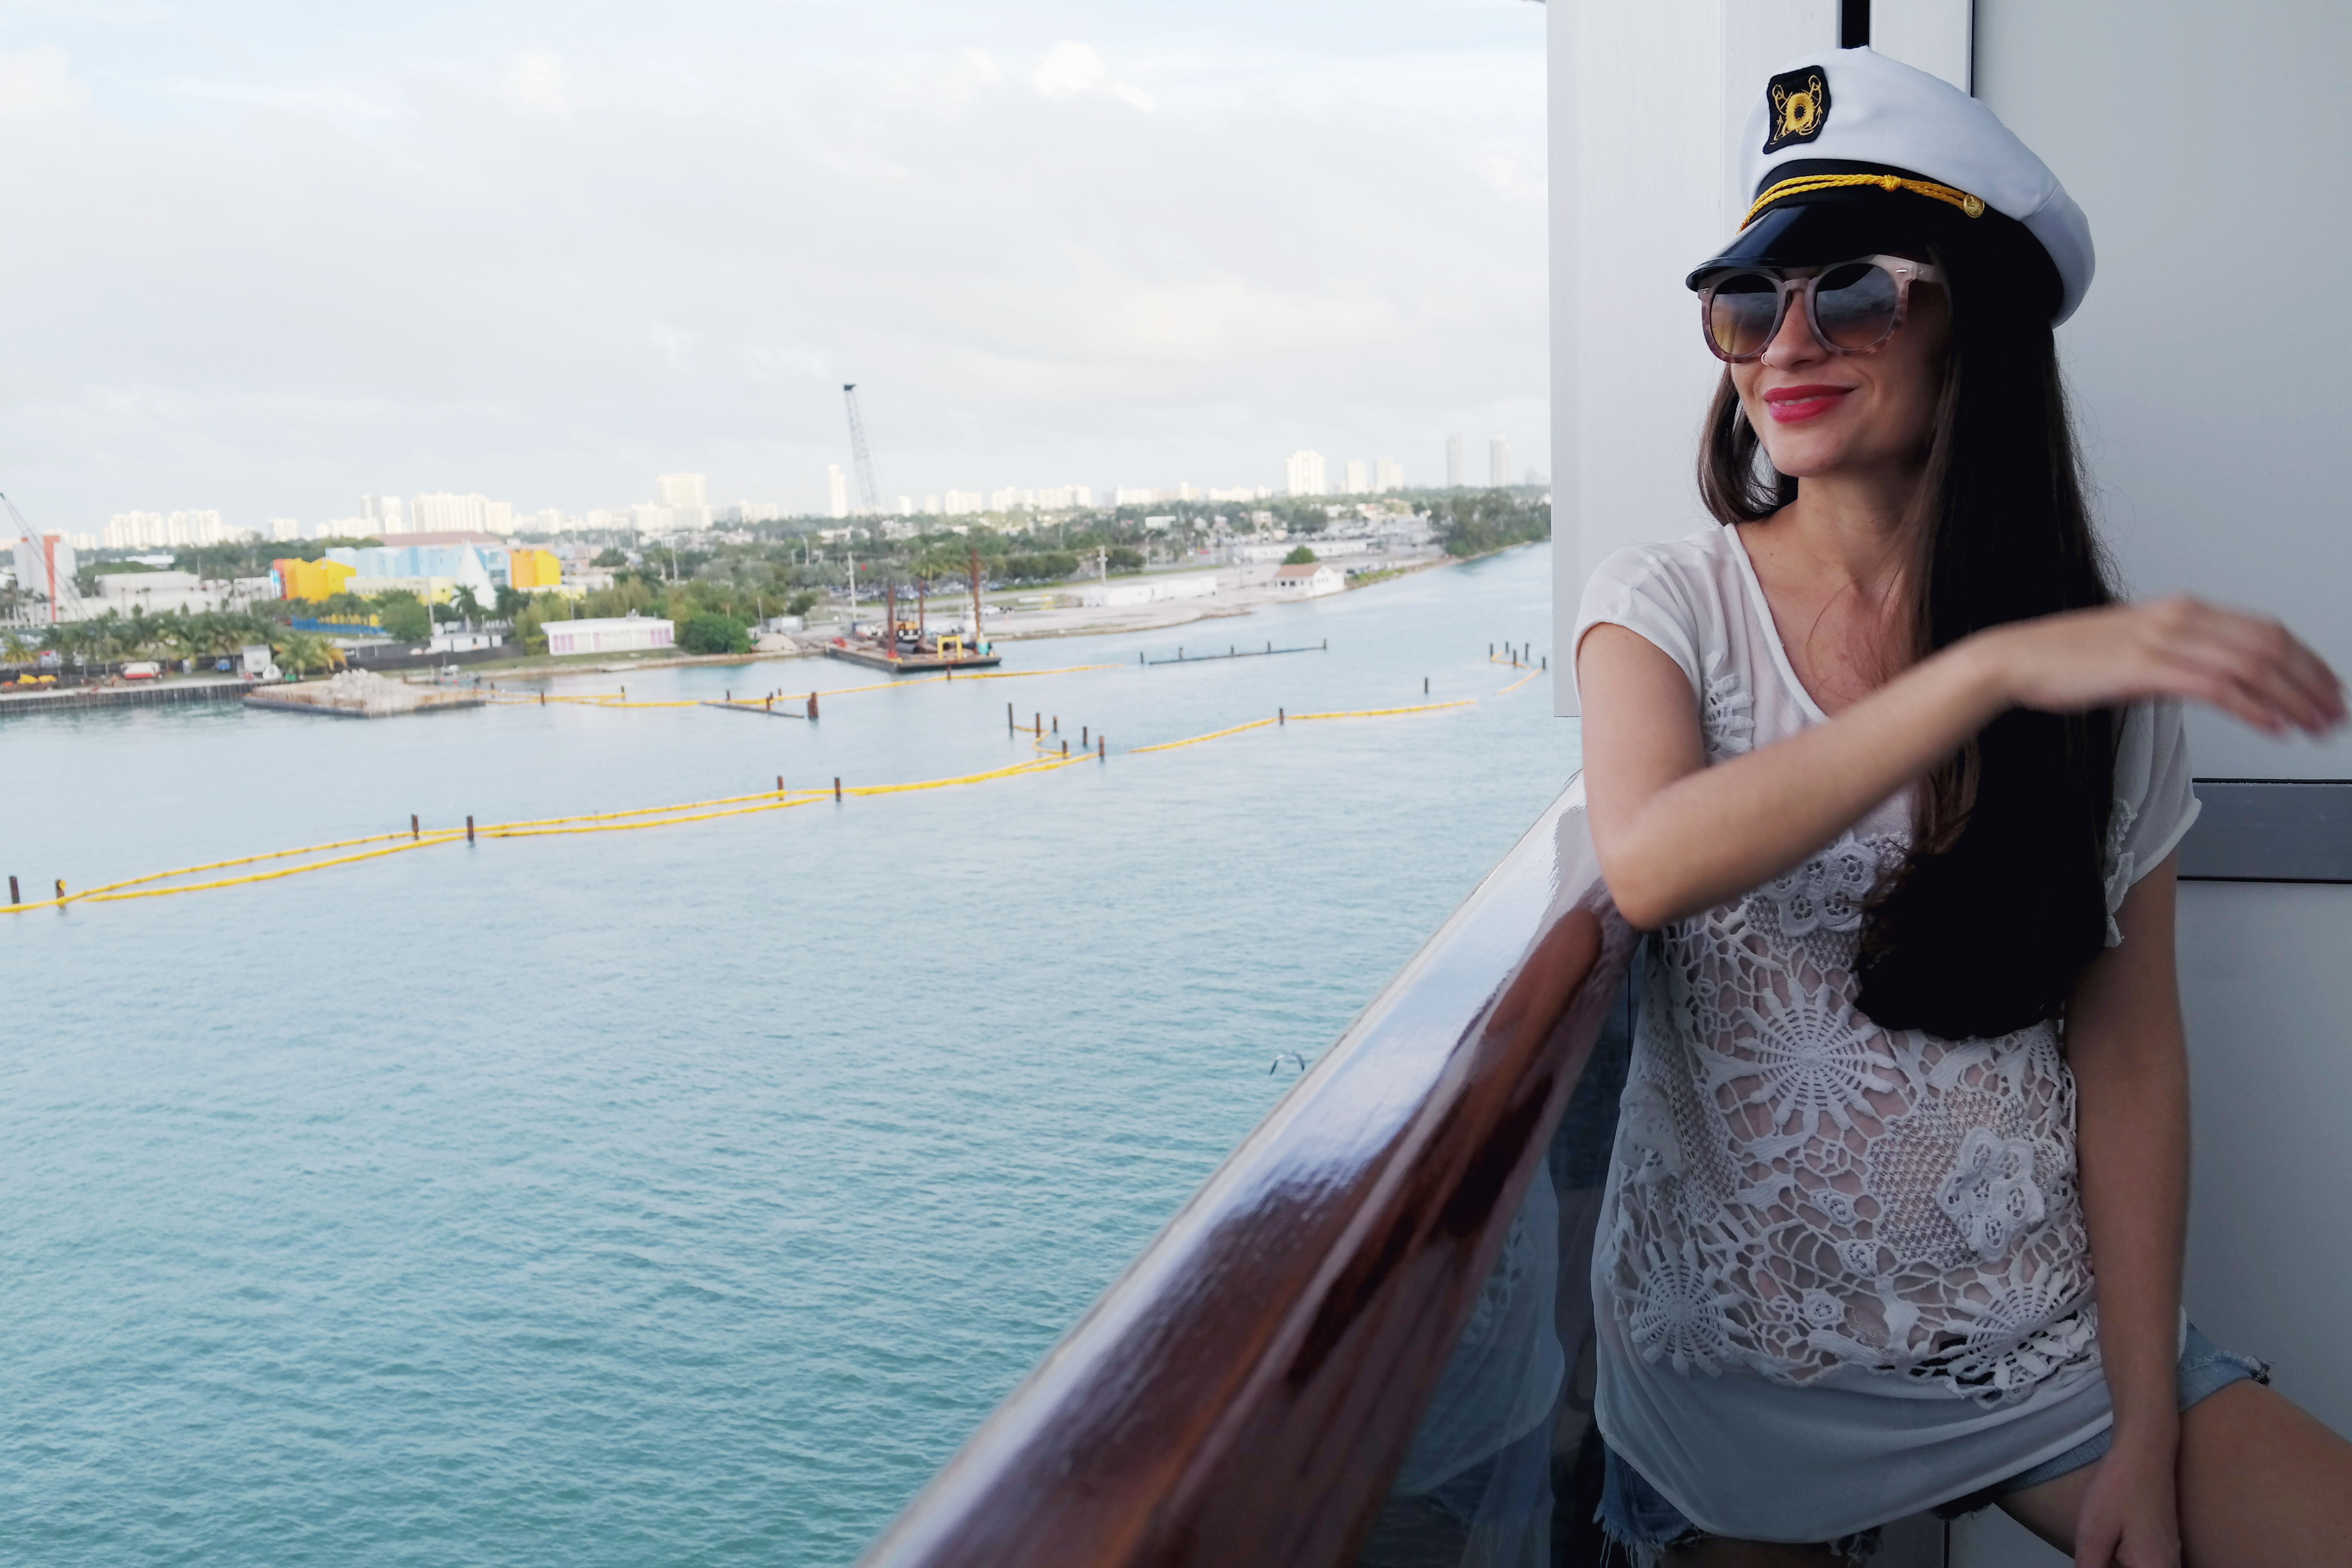 How Do I Choose The Right Cruise For A Girls Or Guys Getaway?